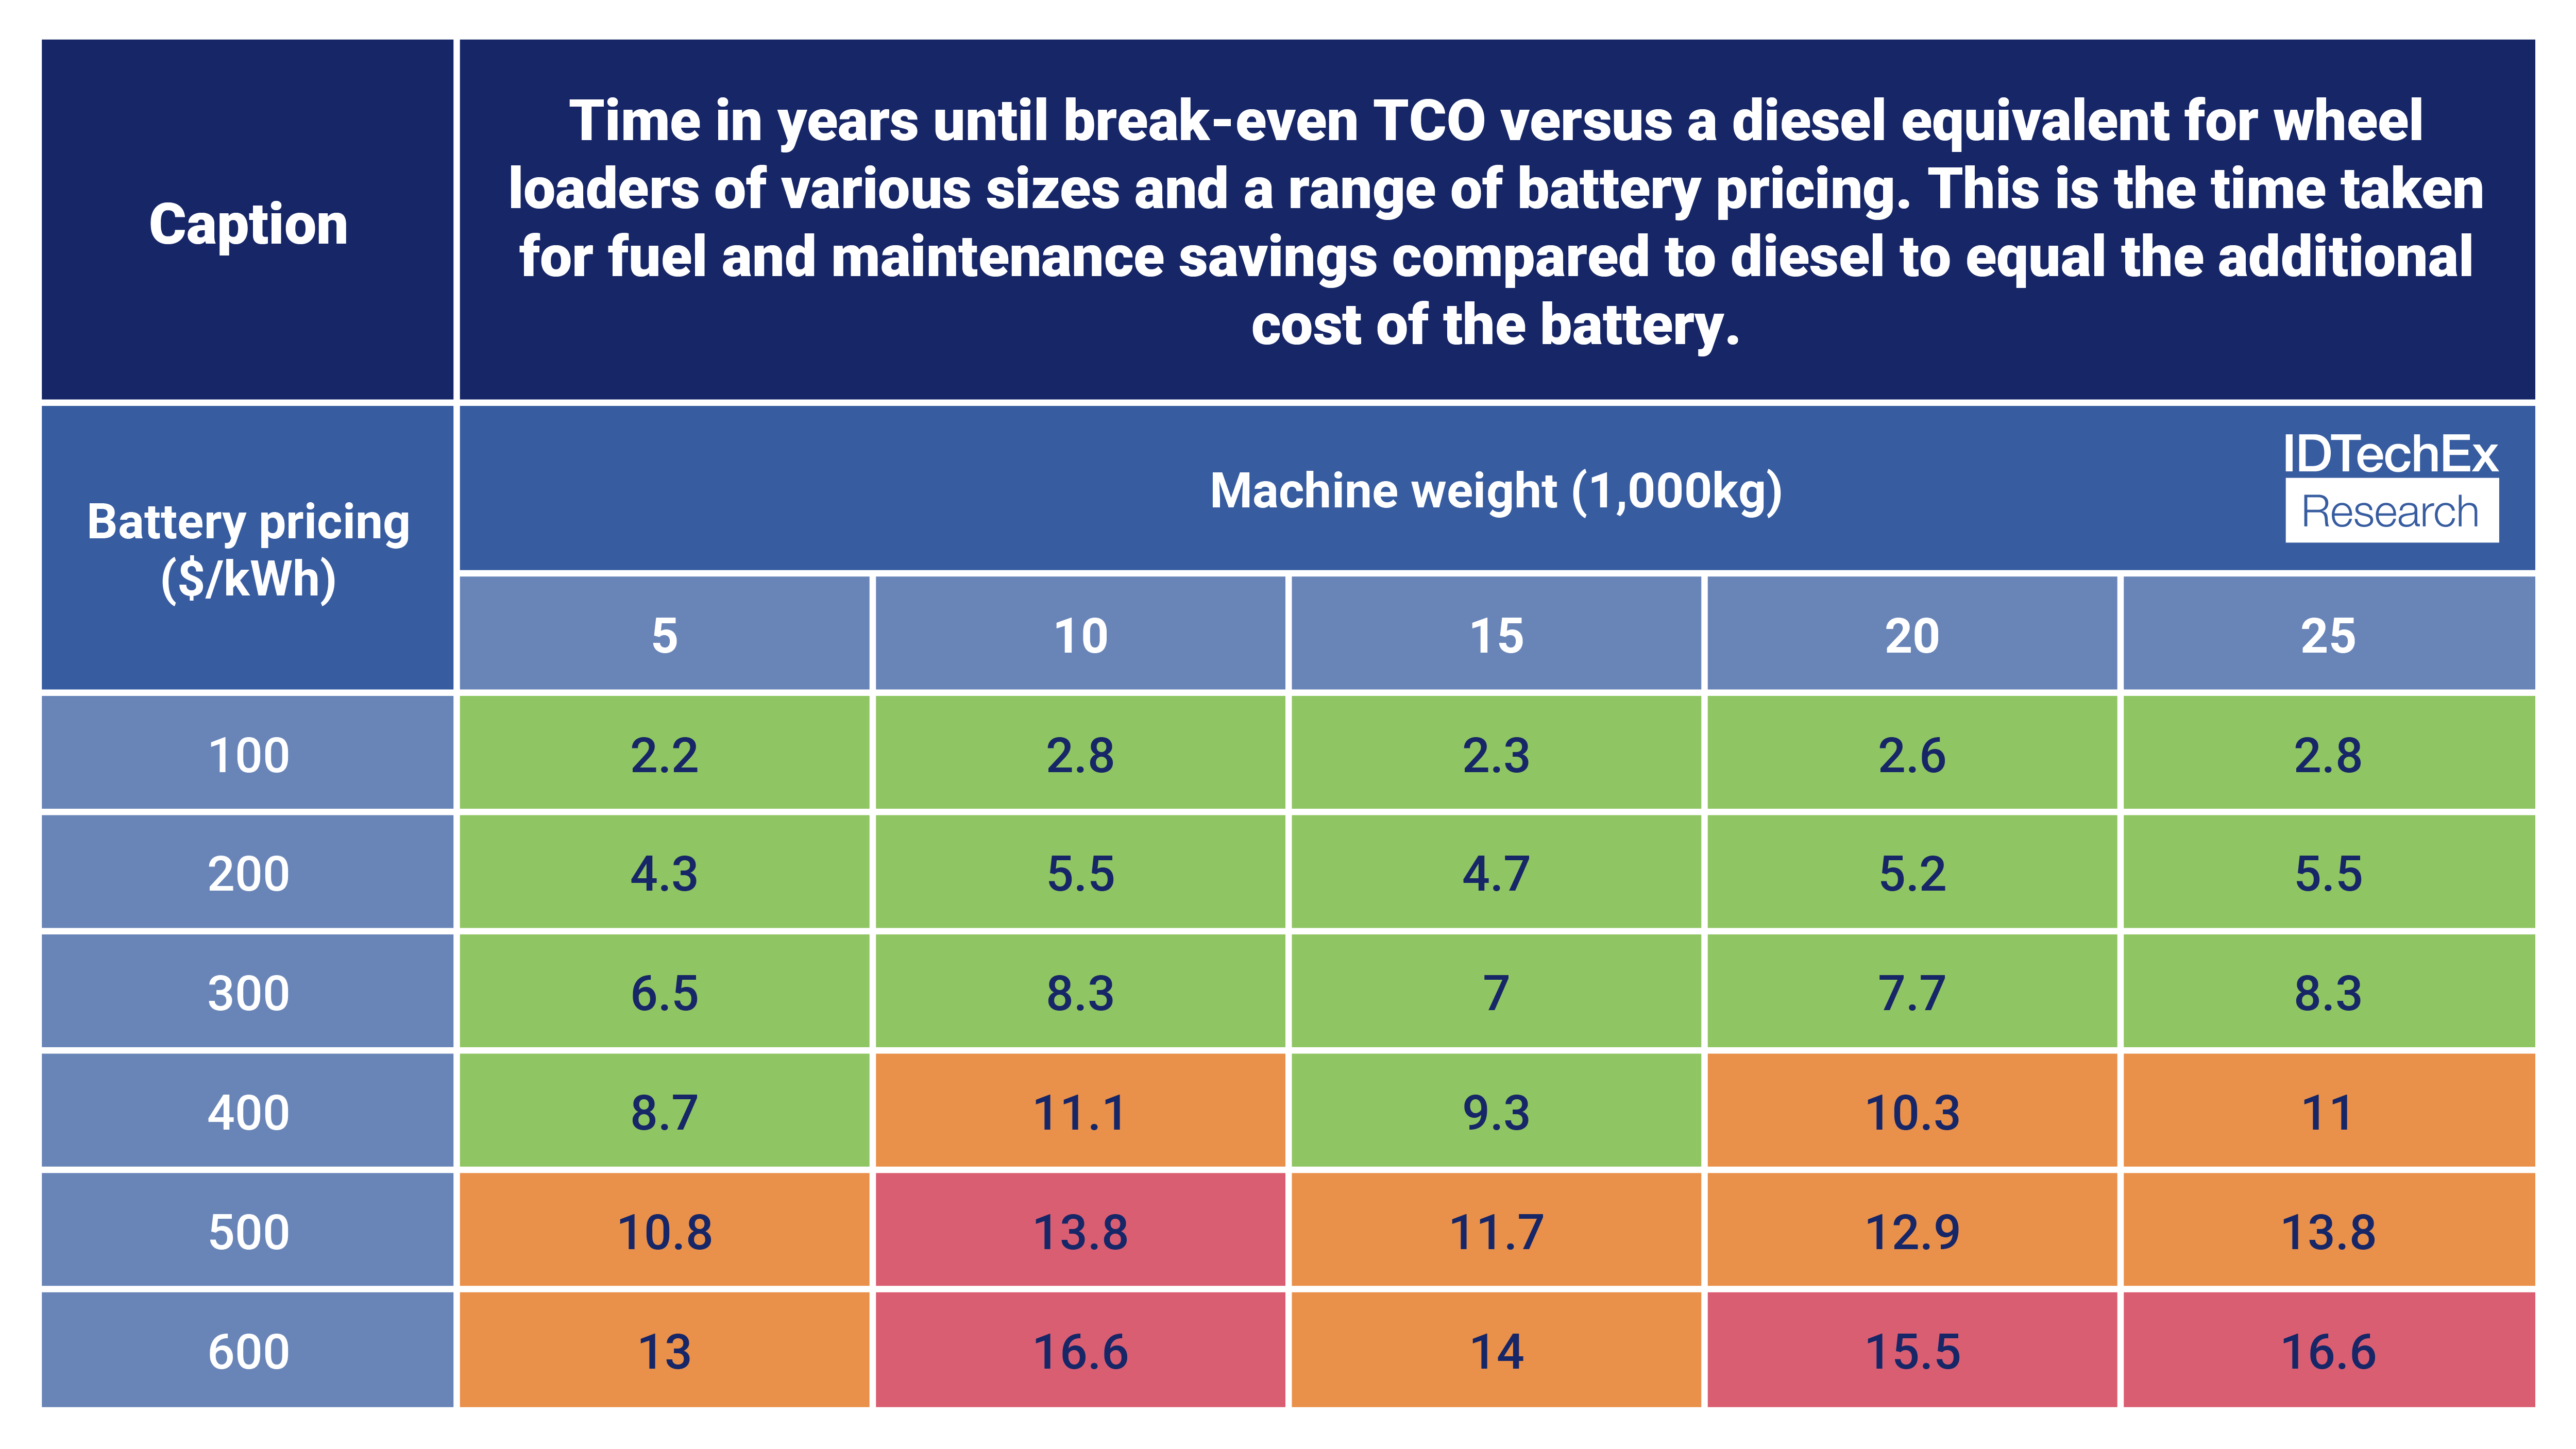 Time in years until break-even TCO versus a diesel equivalent for wheel loaders of various sizes and a range of battery pricing. This is the time taken for fuel and maintenance savings compared to diesel to equal the additional cost of the battery. Source: IDTechEx